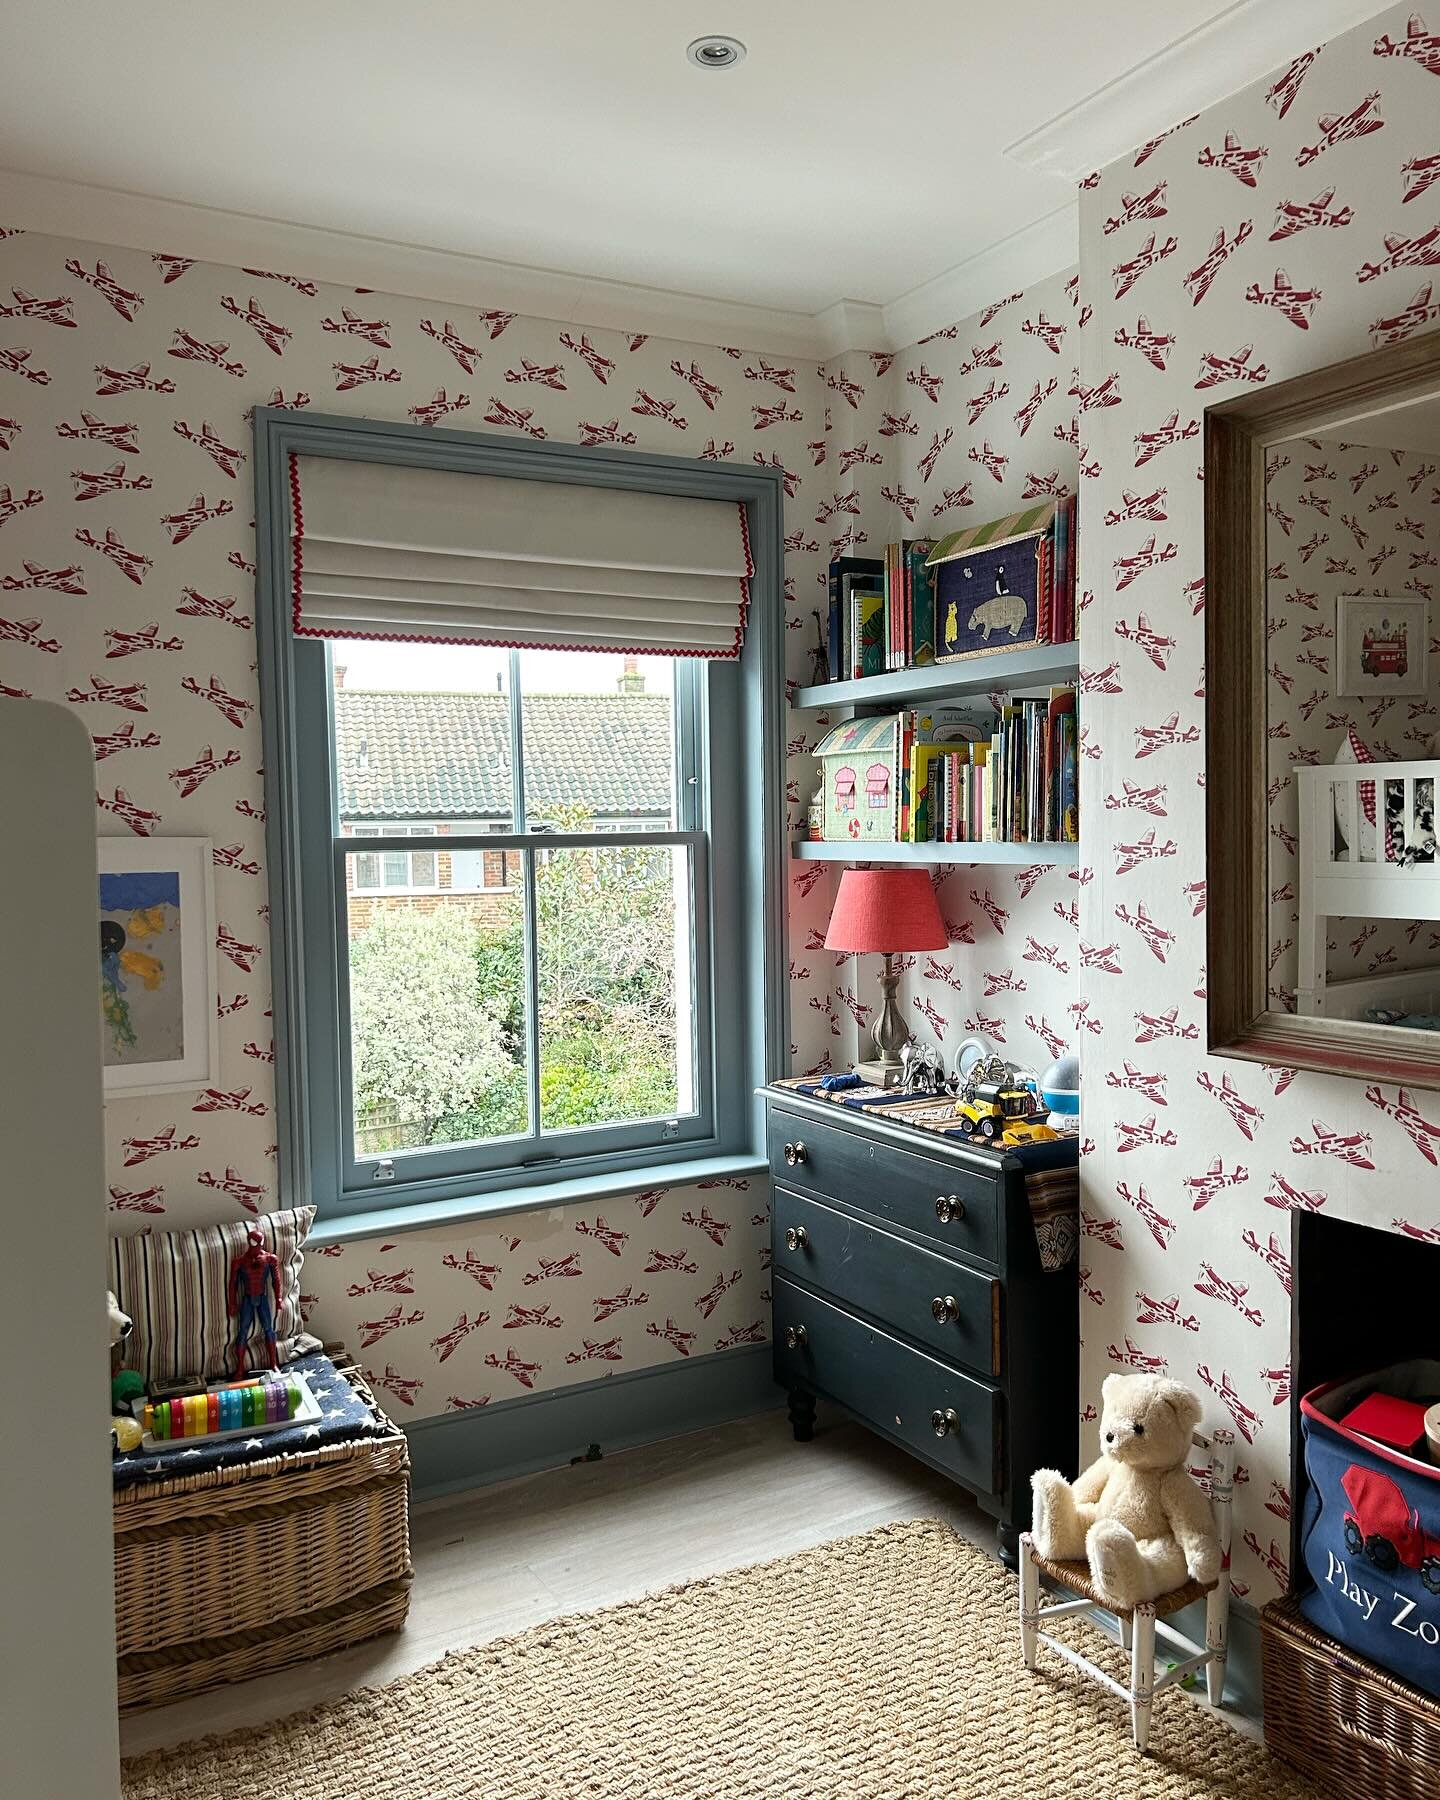 We love working on children&rsquo;s bedrooms and are excited to have some gorgeous nursery projects in the diary for this year&hellip; watch this space 🙃

Pictured here is a boy&rsquo;s bedroom from a recent project in Barnes with the super talented